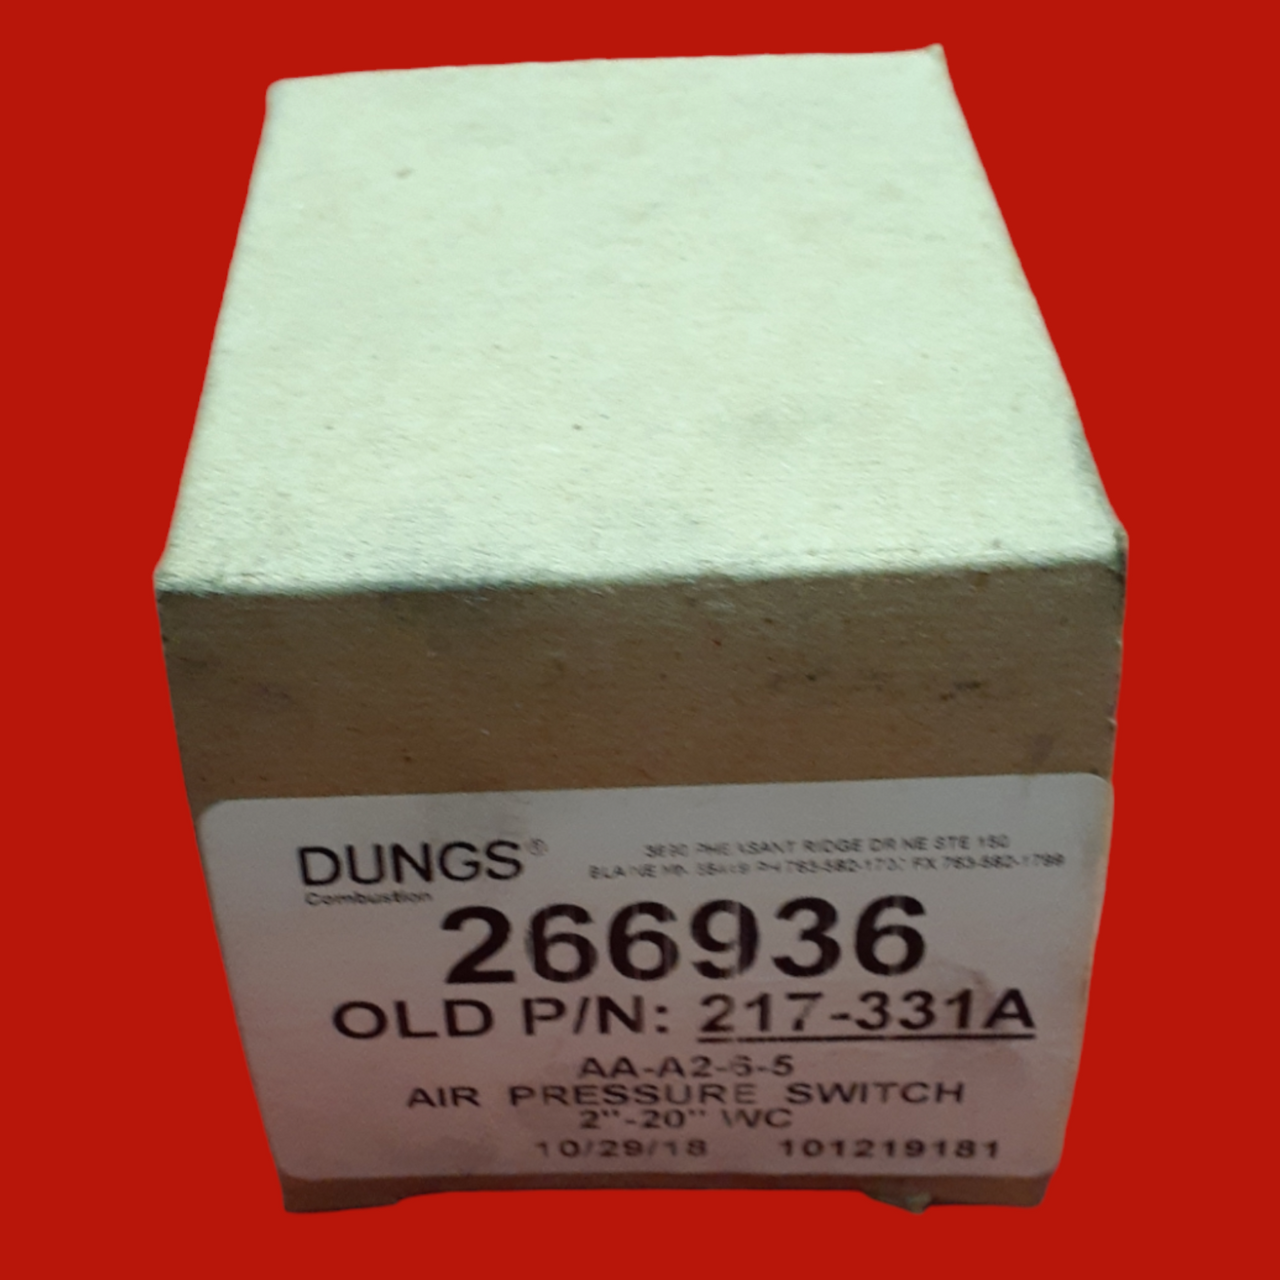 Dungs 266936 Air Pressure Switch 2" - 20" WC (Old P/N: 217-331A)